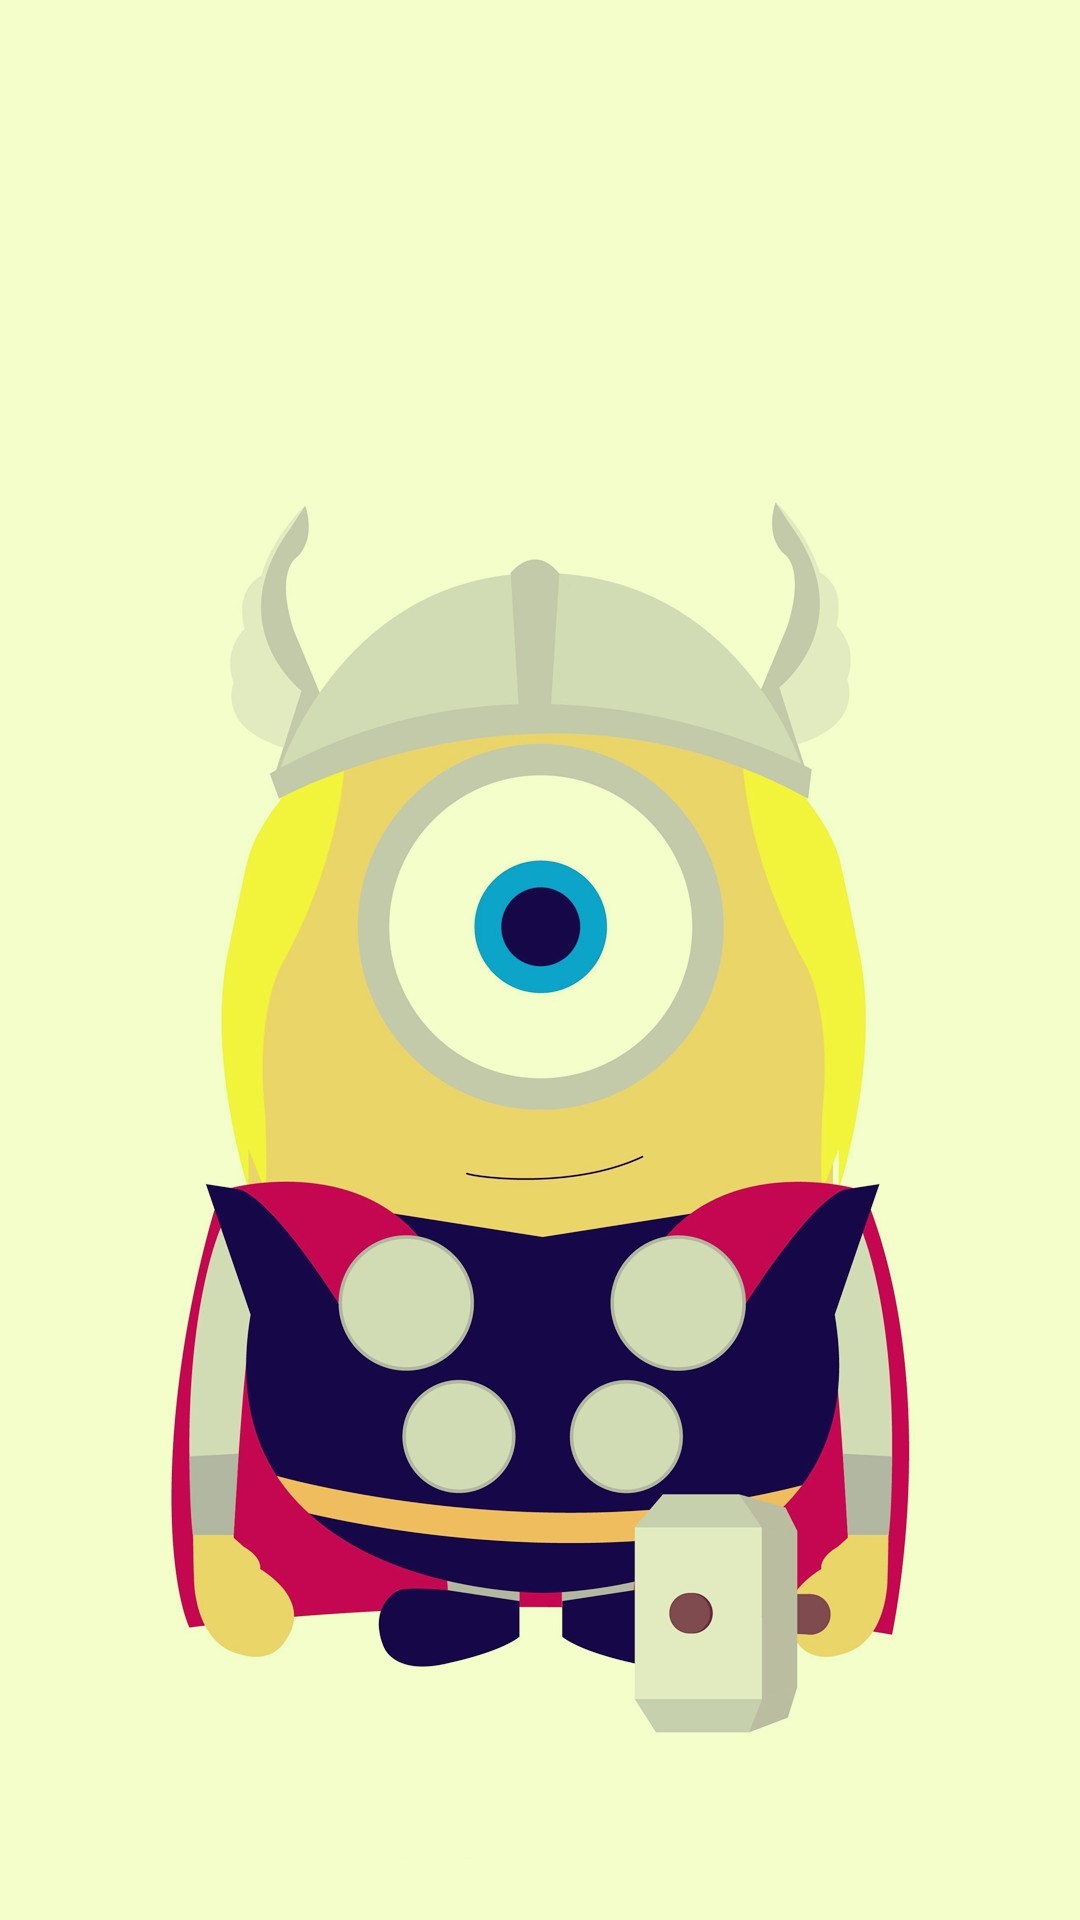 1080x1920 Funny Thor Minion Avengers iphone 6 plus wallpaper HD - 2014 Halloween,  Despicable Me